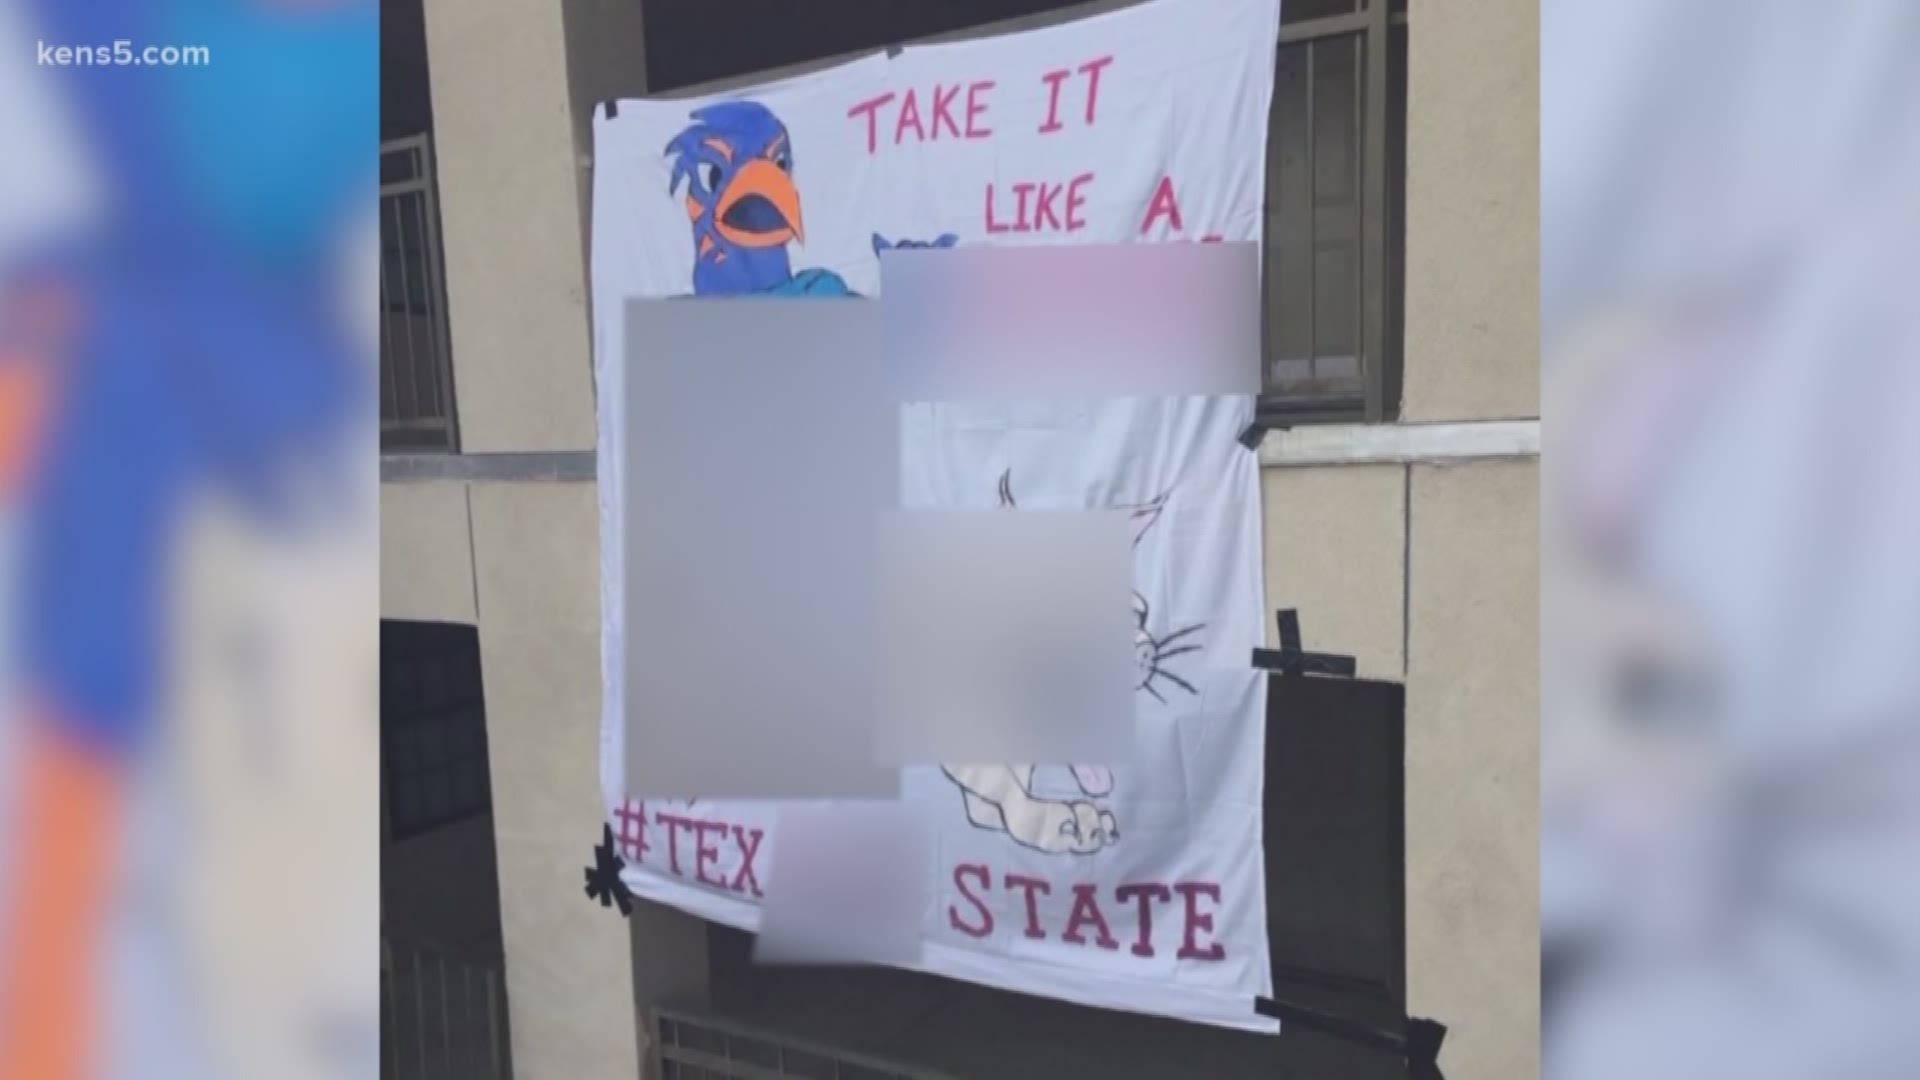 UTSA is apologizing to Texas State after students put up banners referencing sexual assault ahead of the teams' football game on Saturday.